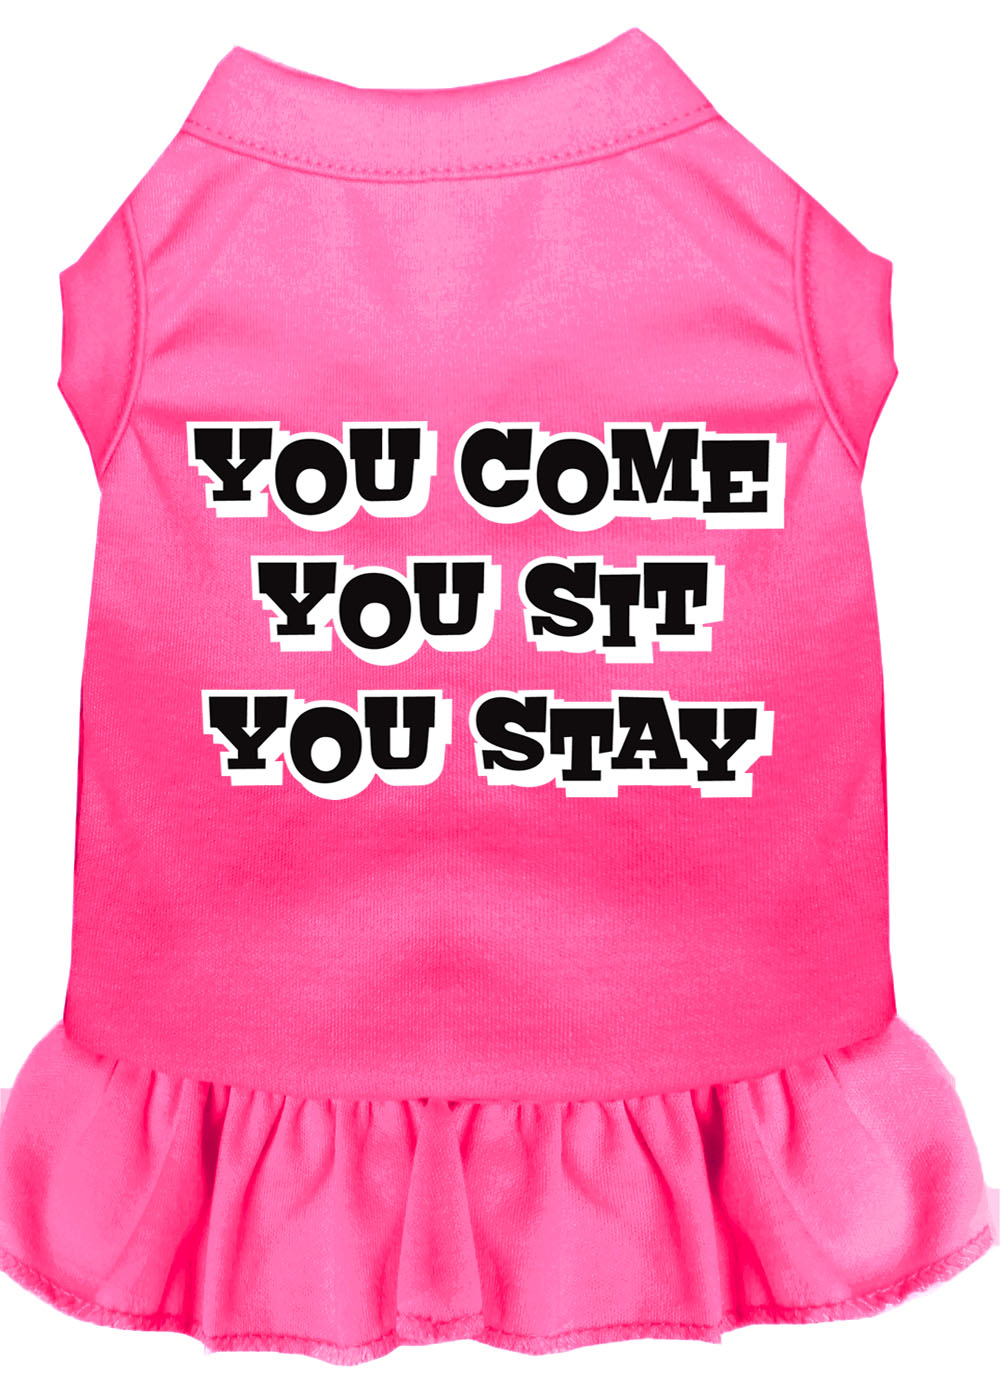 You Come, You Sit, You Stay Screen Print Dress Bright Pink 4x (22) GreatEagleInc